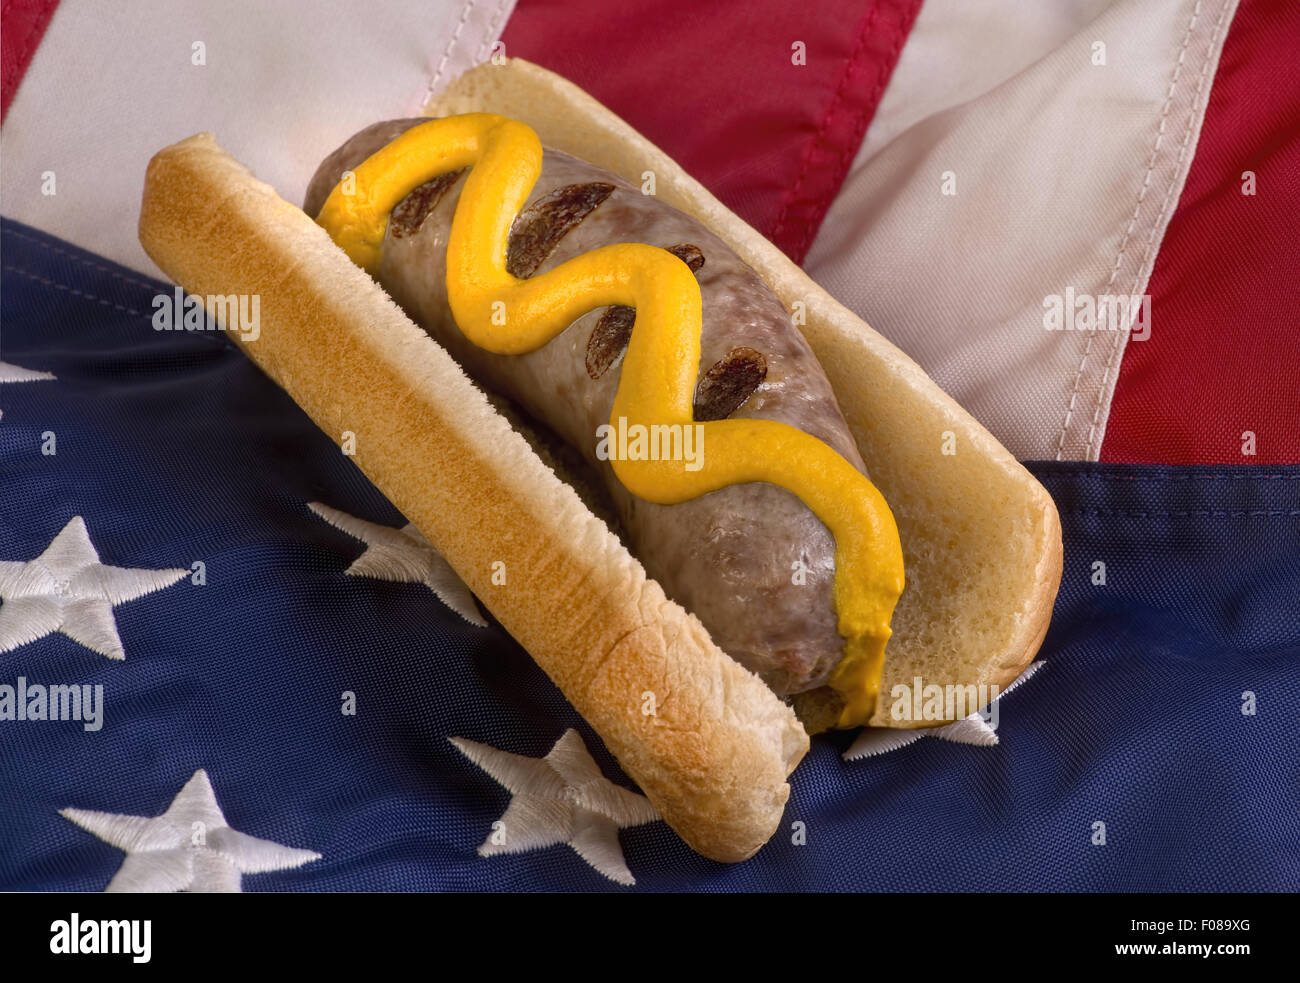 Grilled bratwurst on bun and American flag. Stock Photo